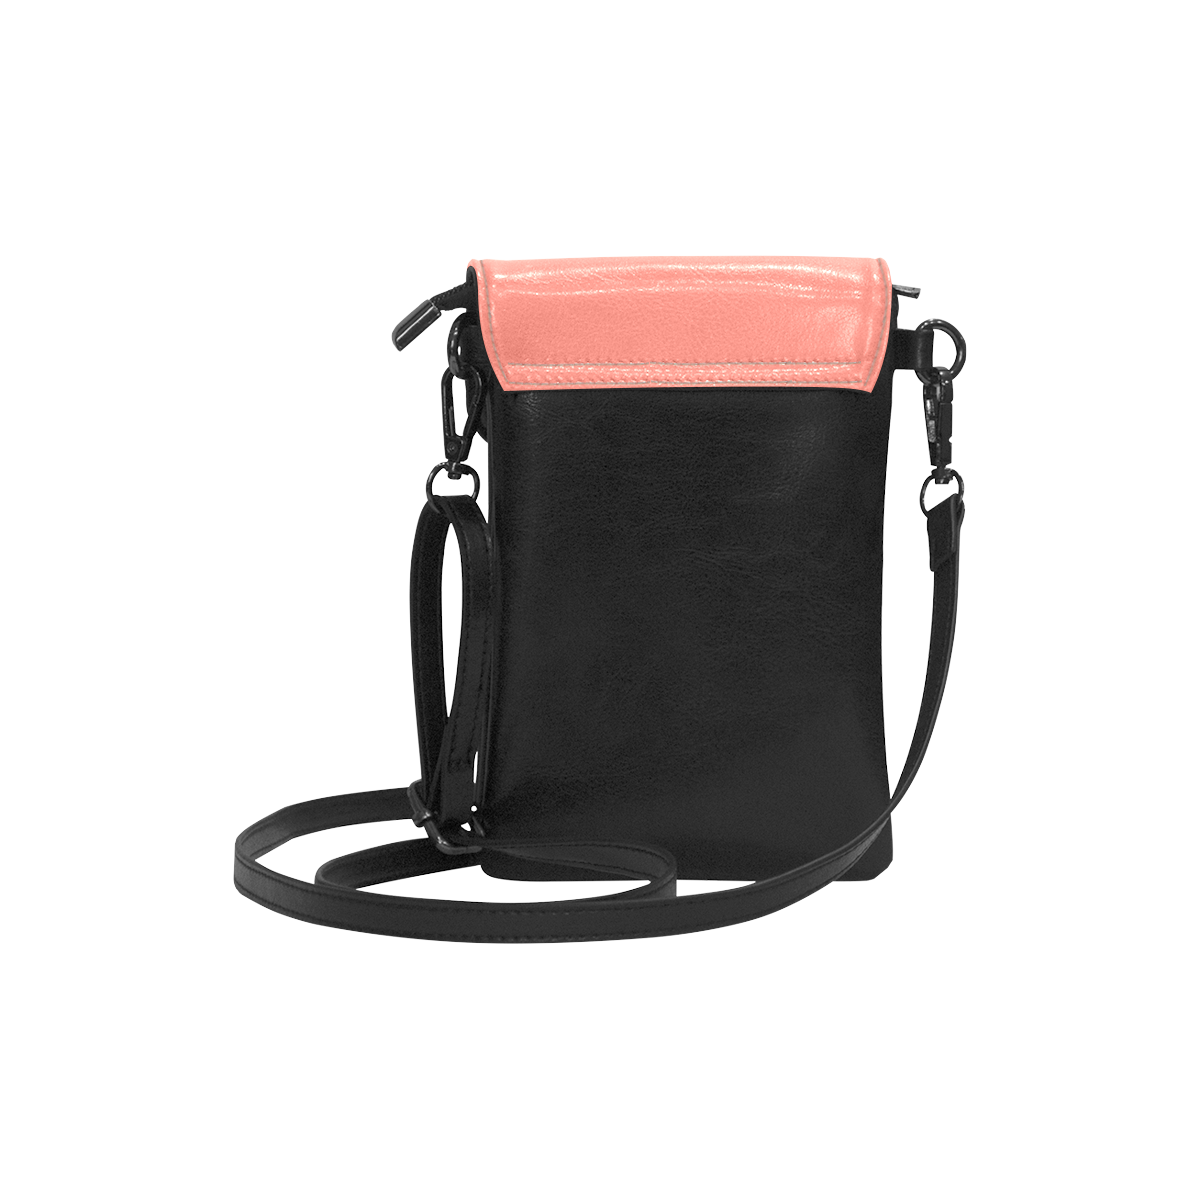 color salmon Small Cell Phone Purse (Model 1711)